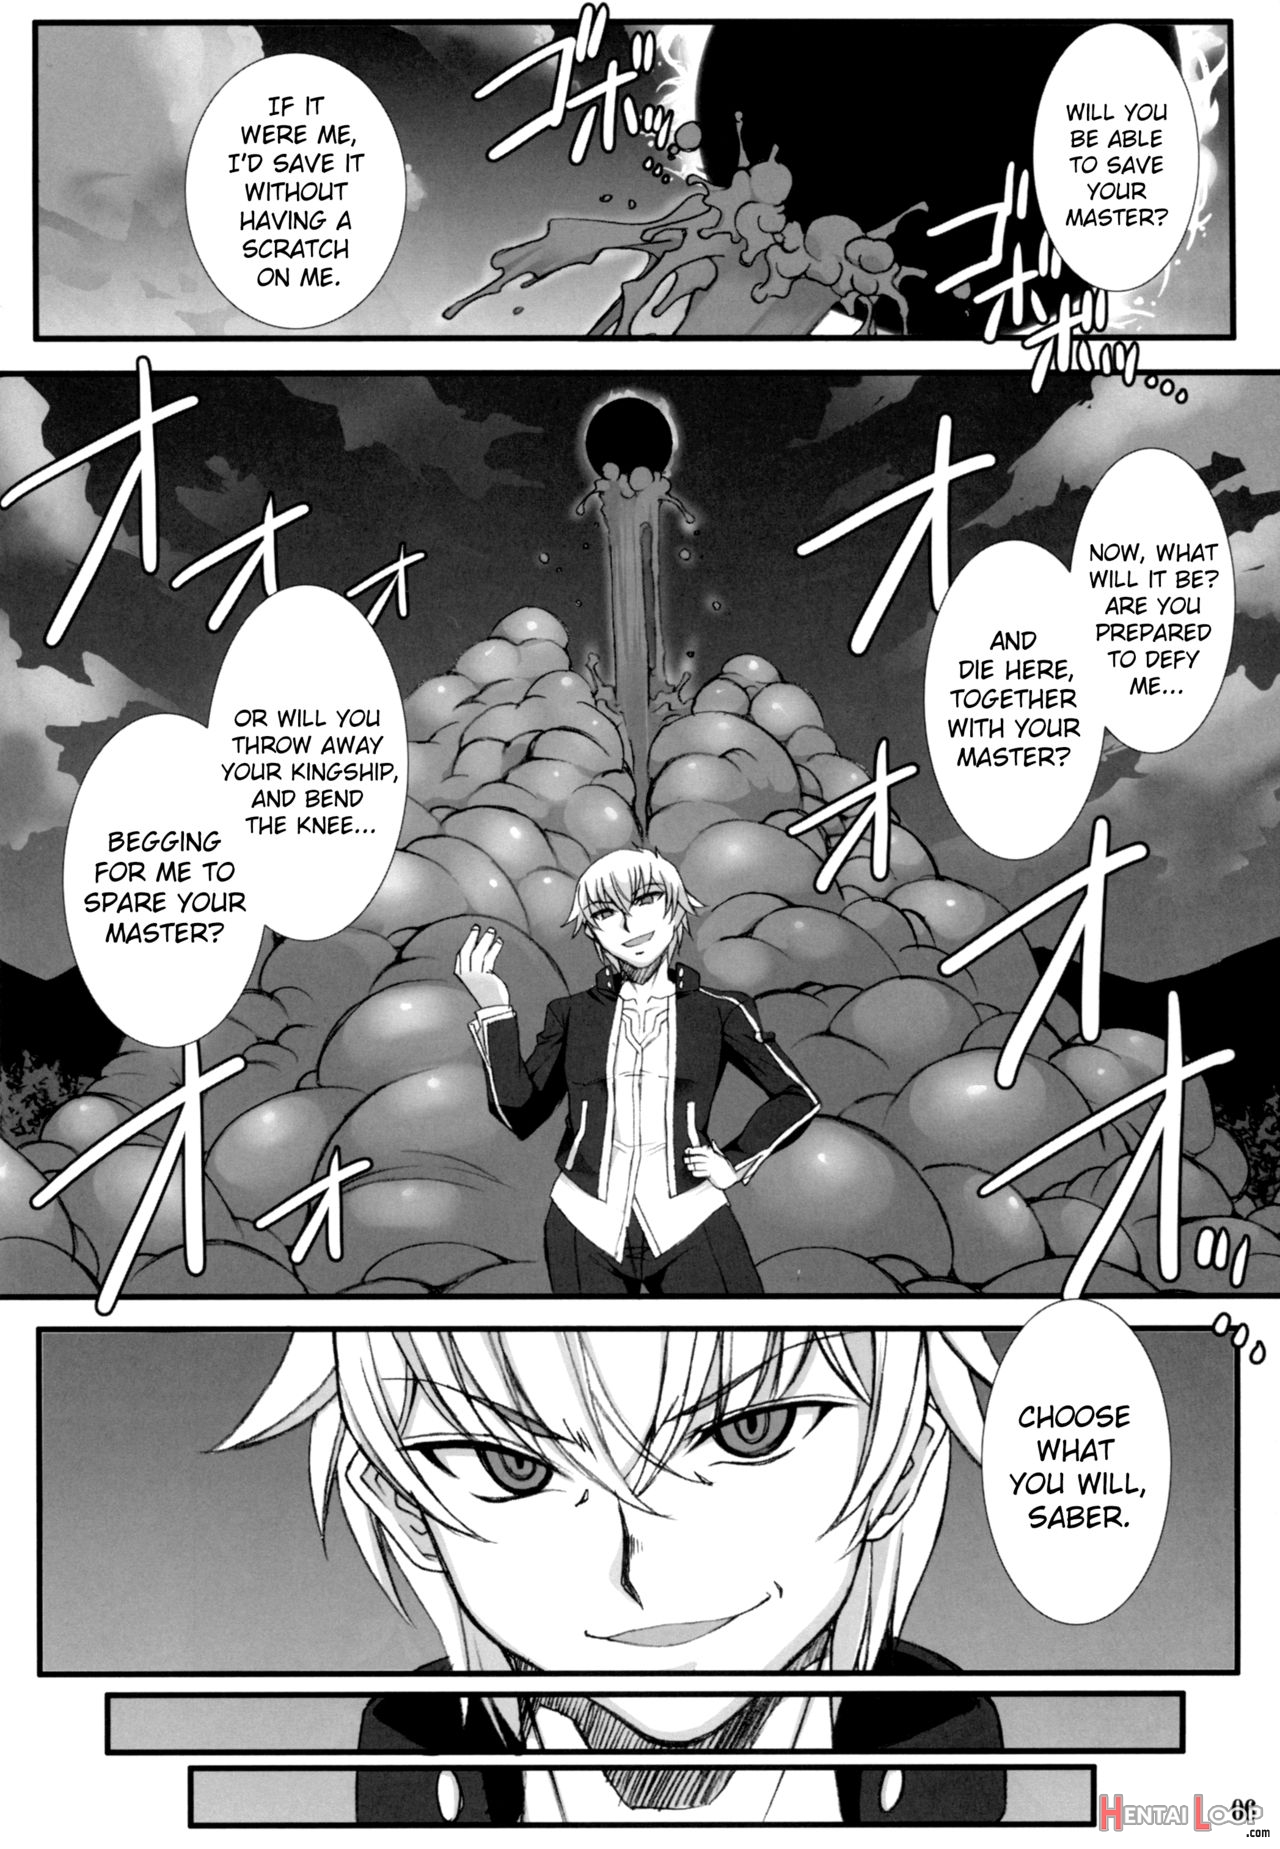 Rin Destruction -stained Red- page 6